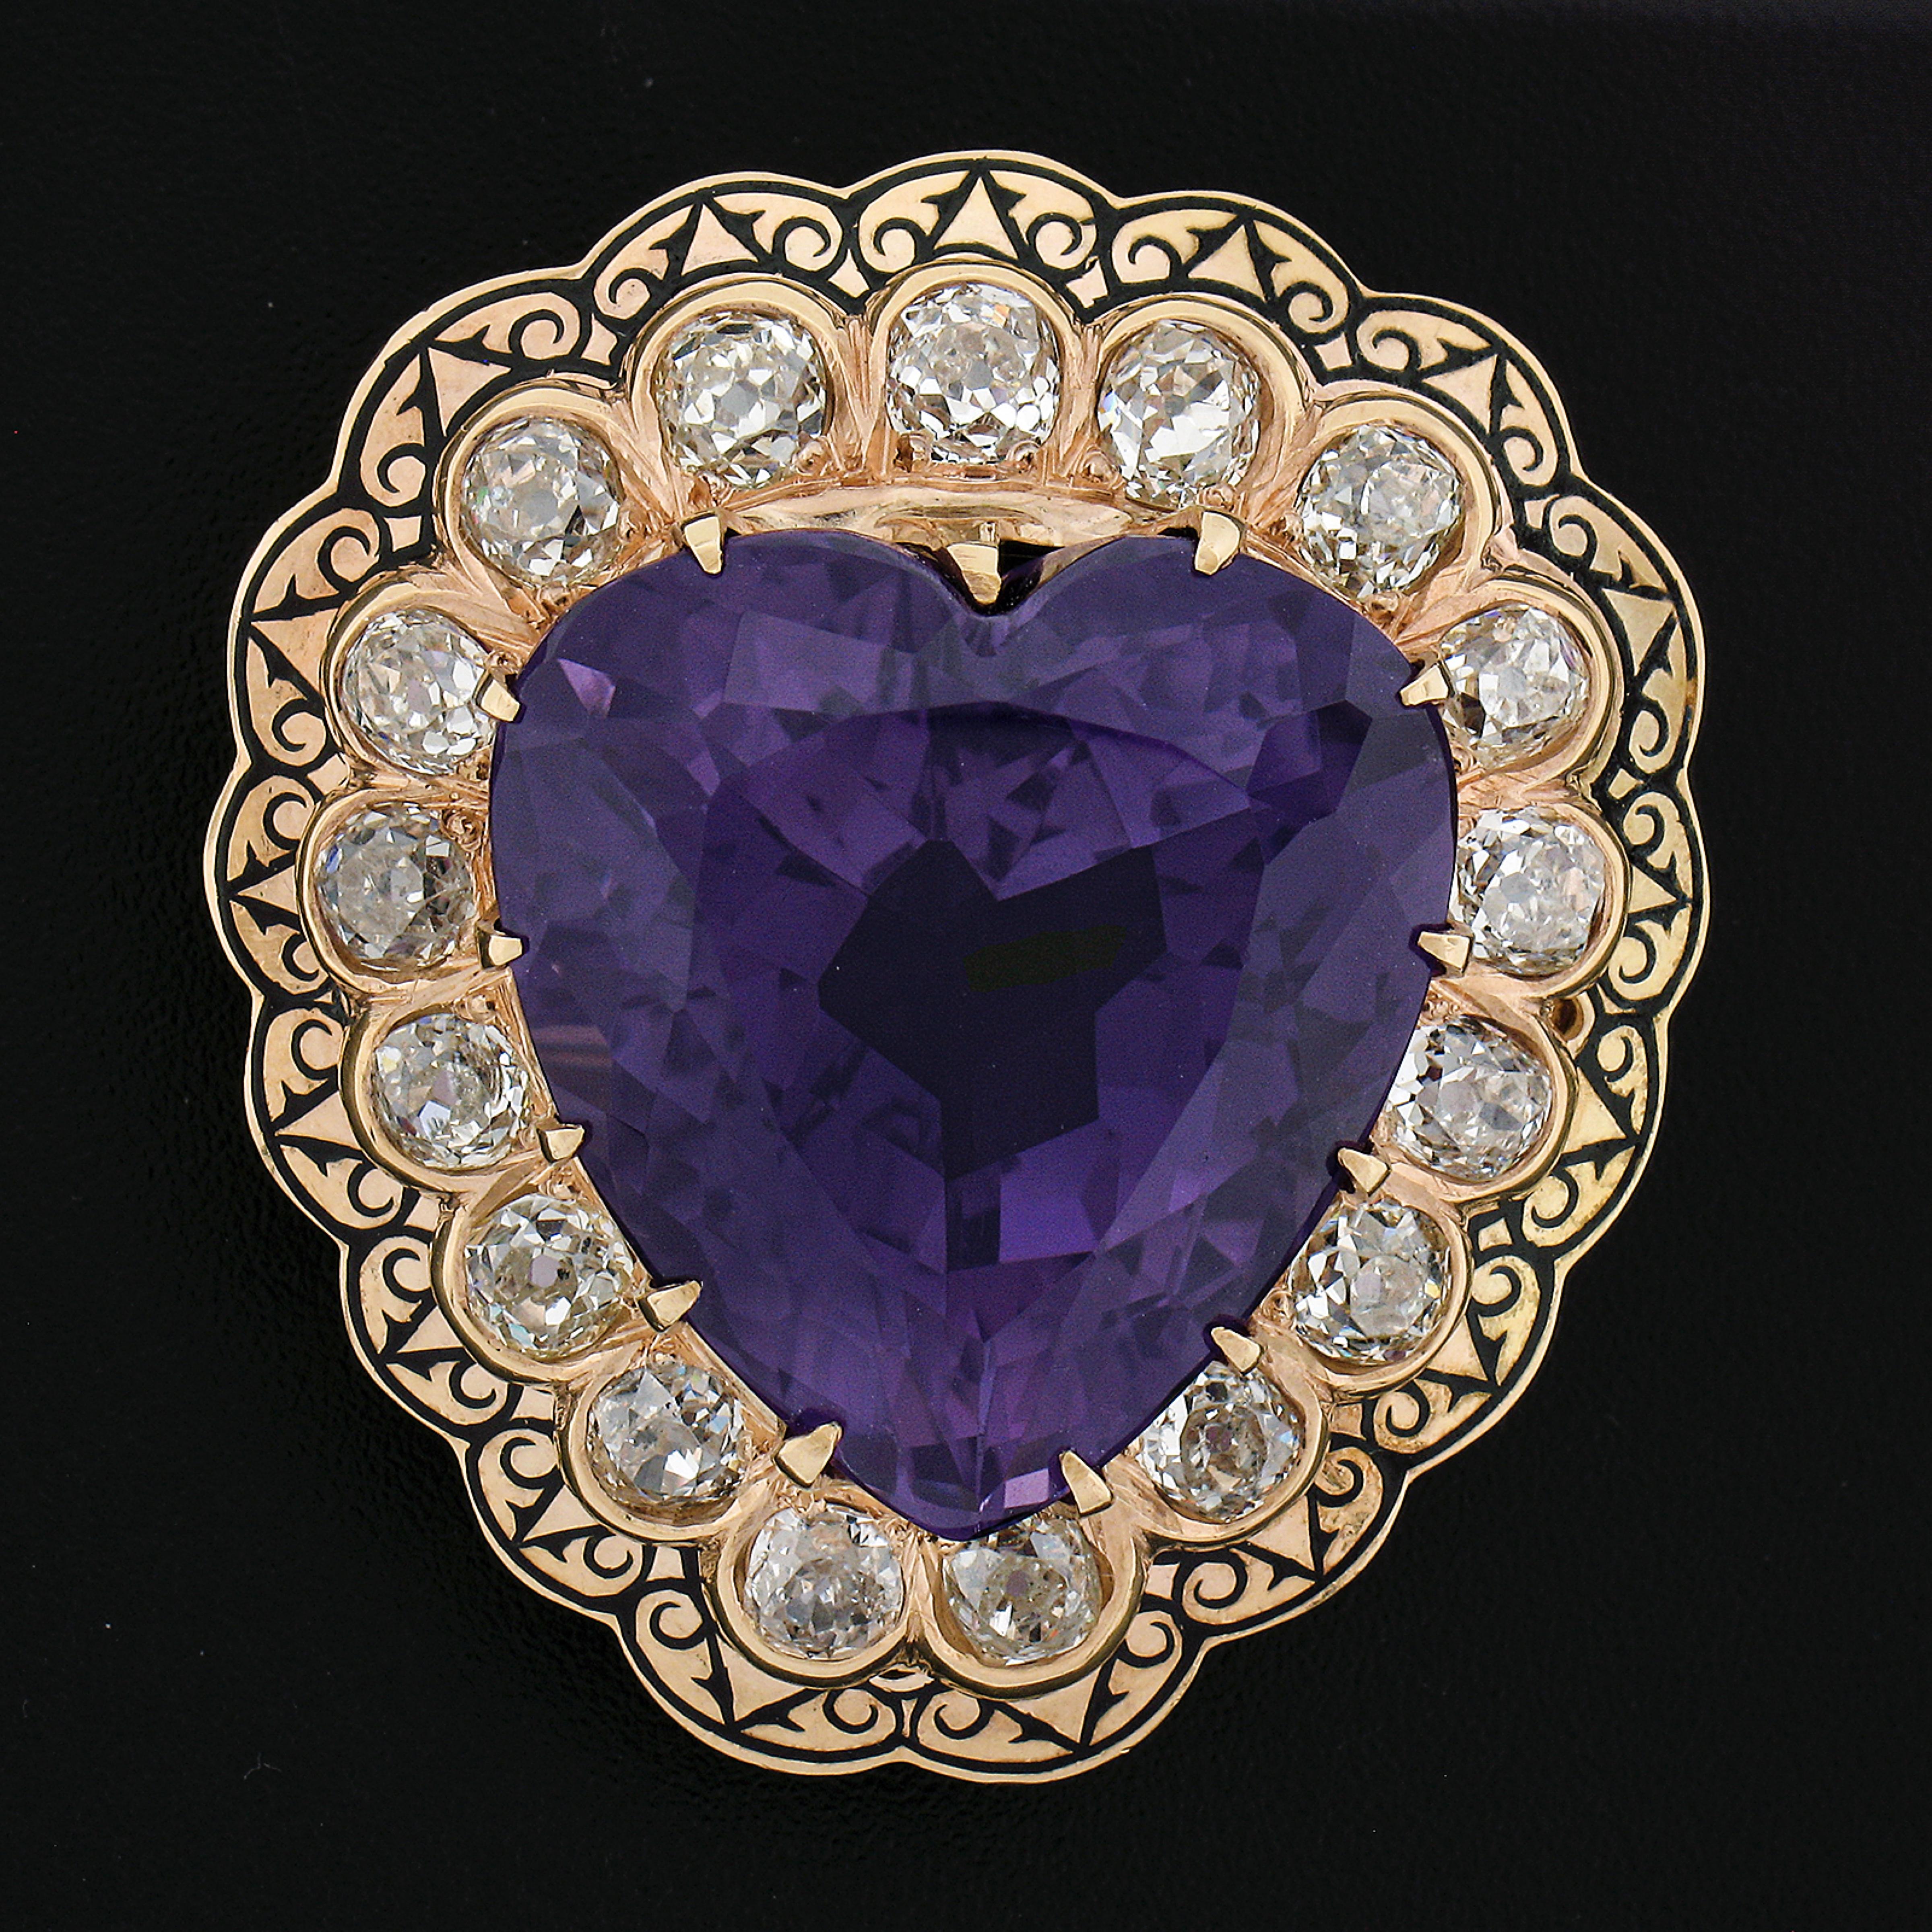 This impressive antique brooch or pendant was crafted during the Victorian ear in solid 14k yellow gold and features a large heart design that is set with a truly mesmerizing royal purple amethyst stone that is surrounded by 17 old mine cut diamonds